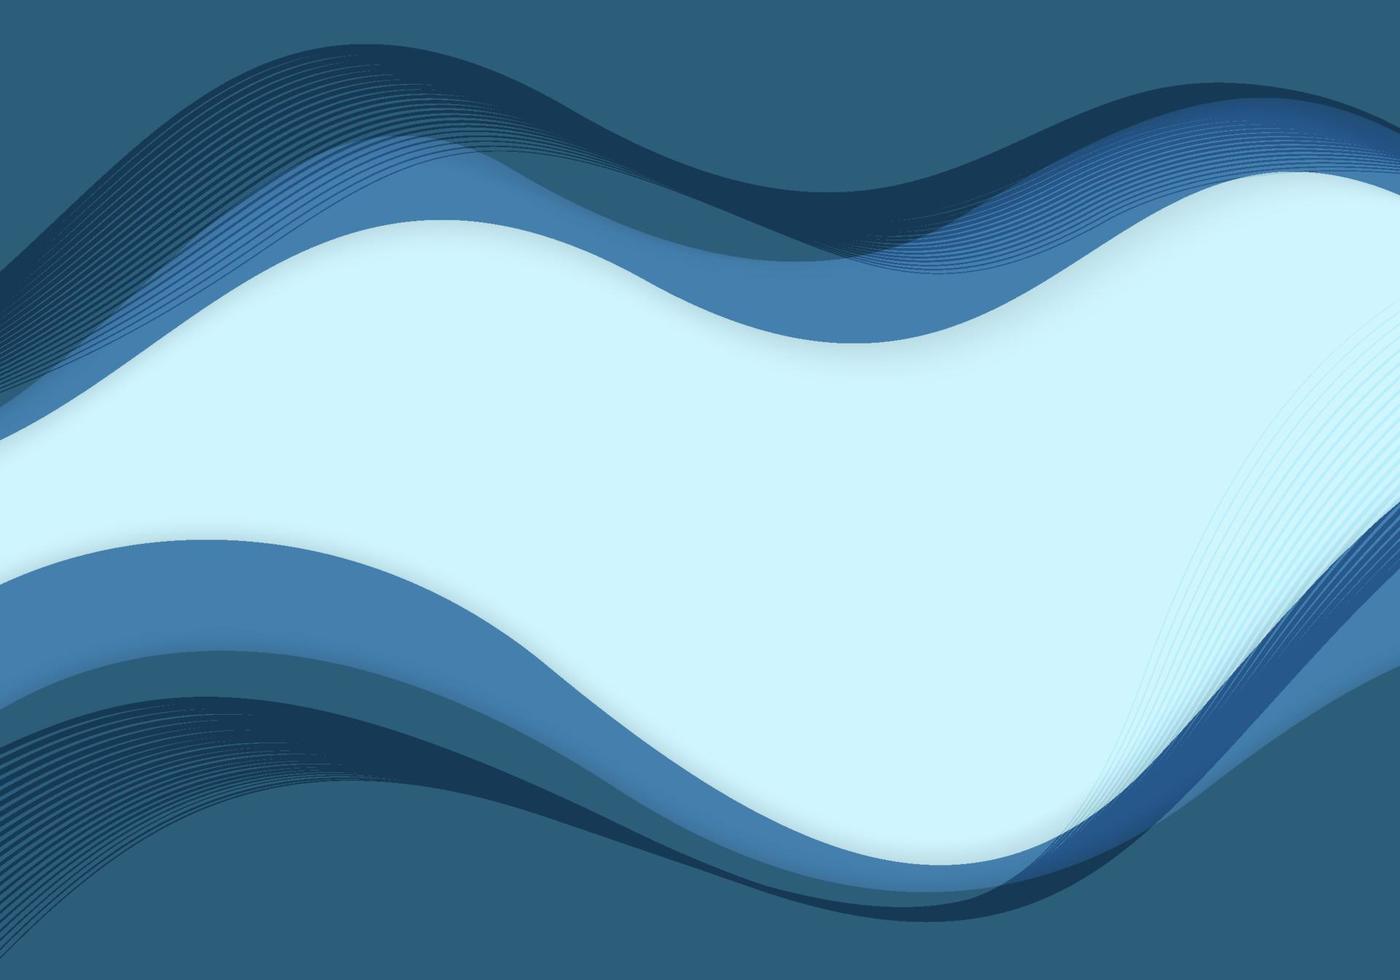 Abstract wavy blue template design decorative artwork minimal style template. vector